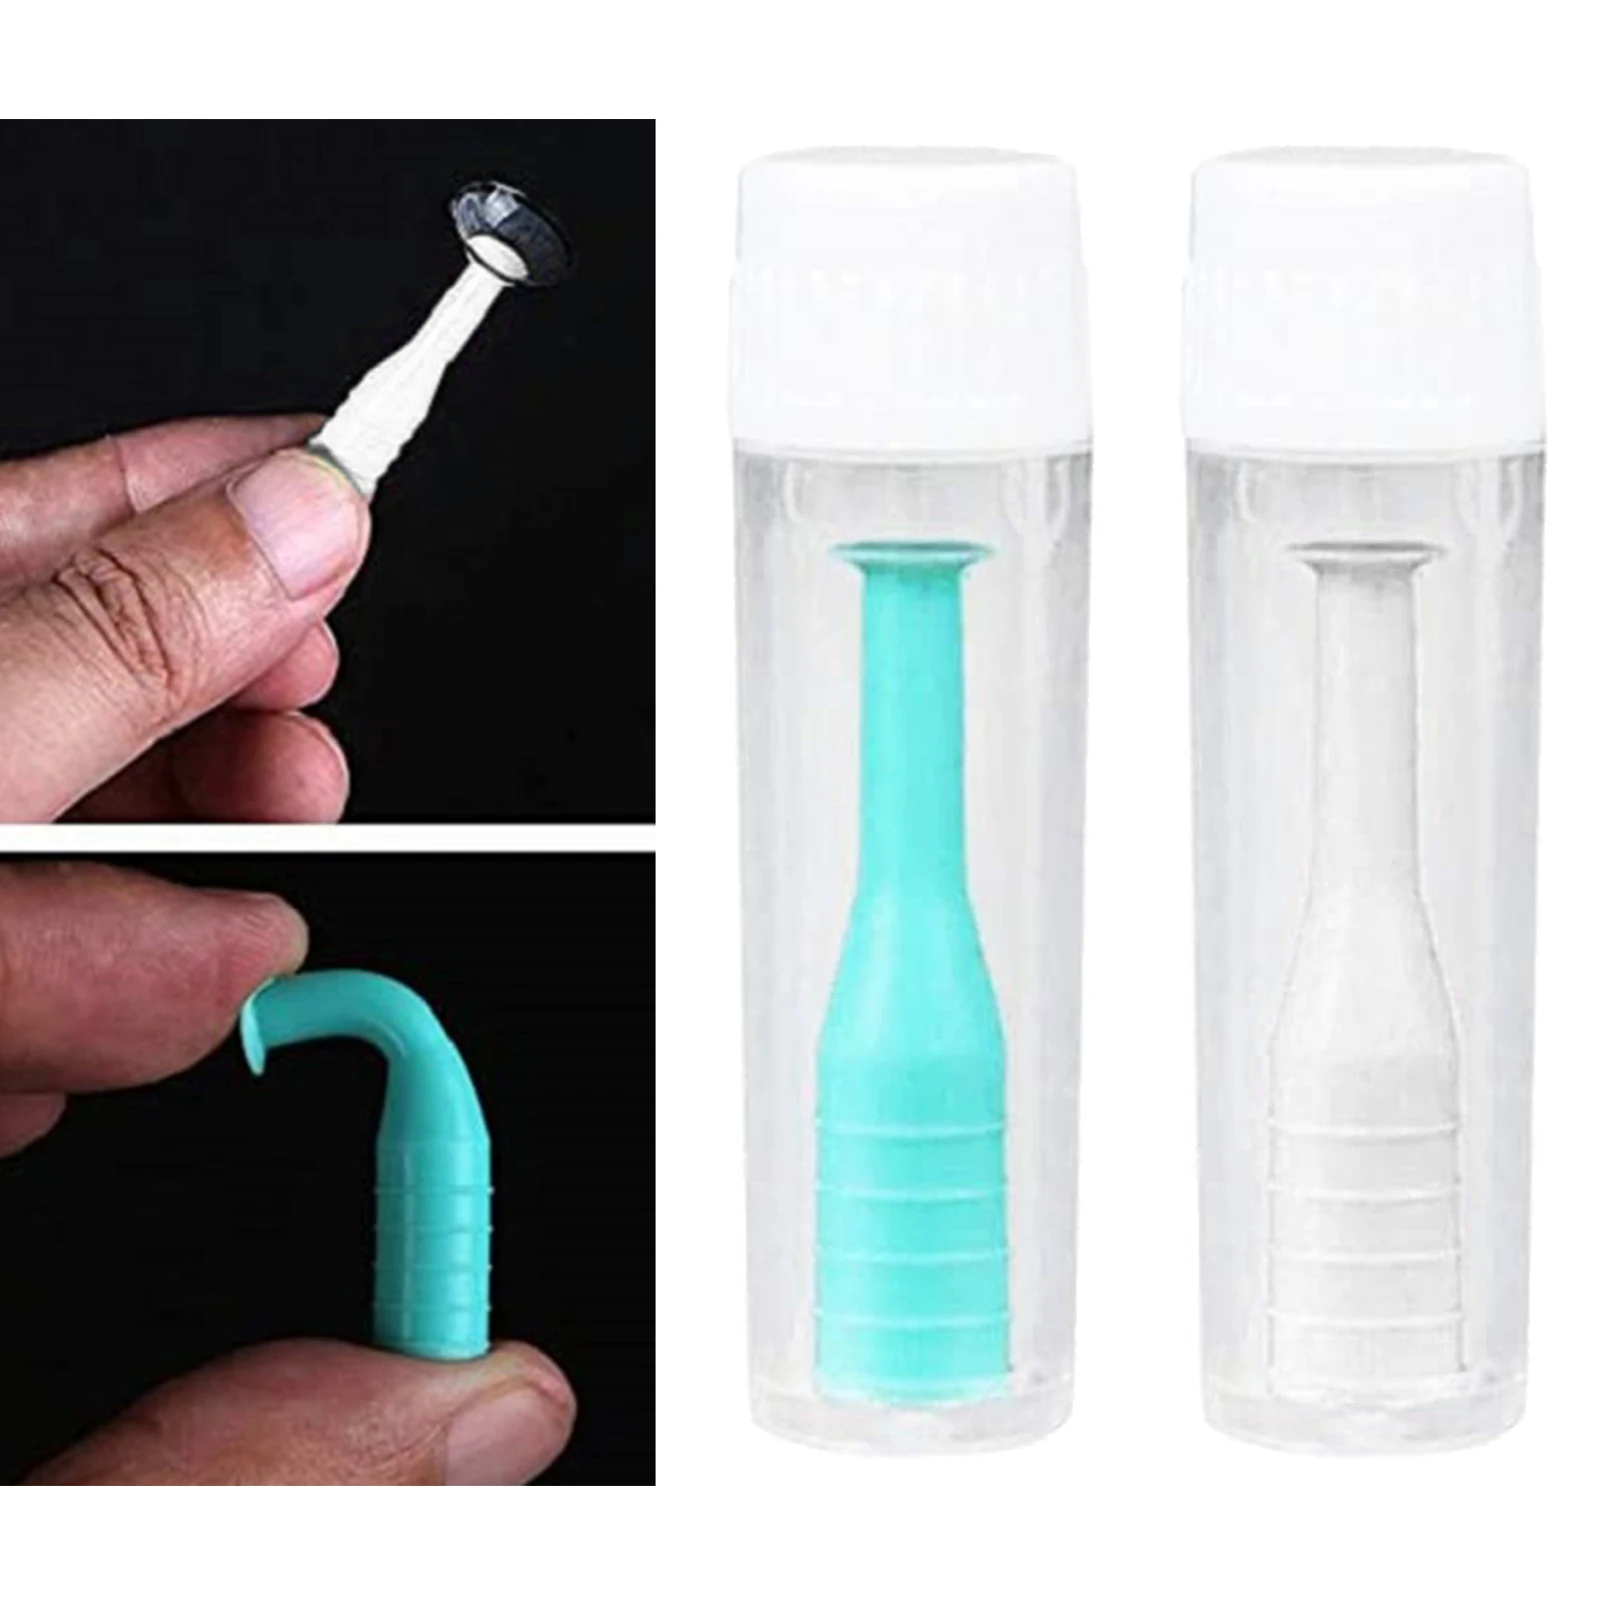 Hard Contact Lens Remover Insertion Tool Suction Stick Applicator for Soft Hard Lenses RGP